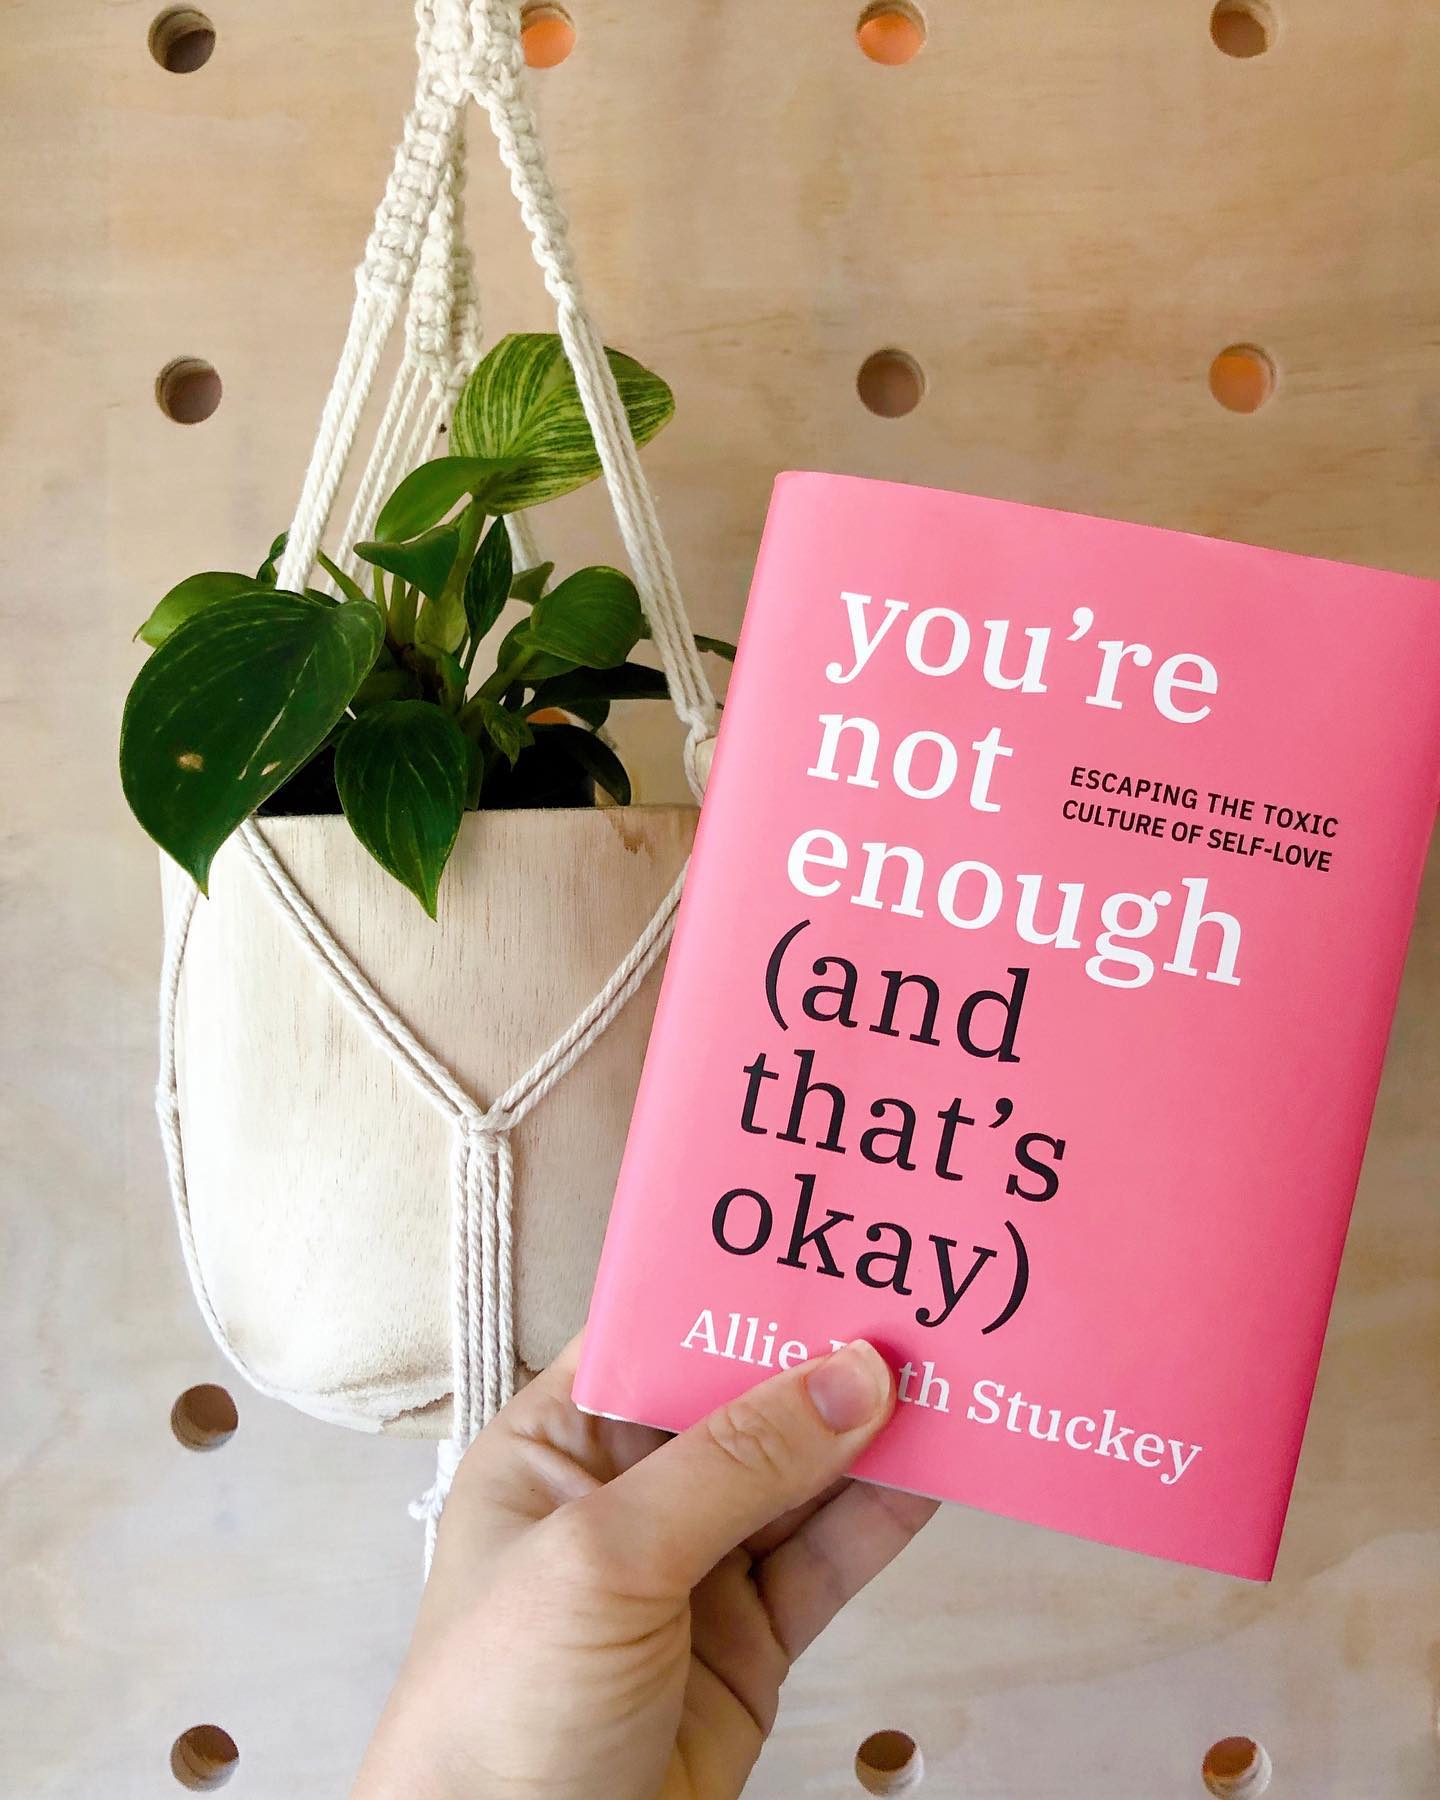 You’re Not Enough (and that’s okay)